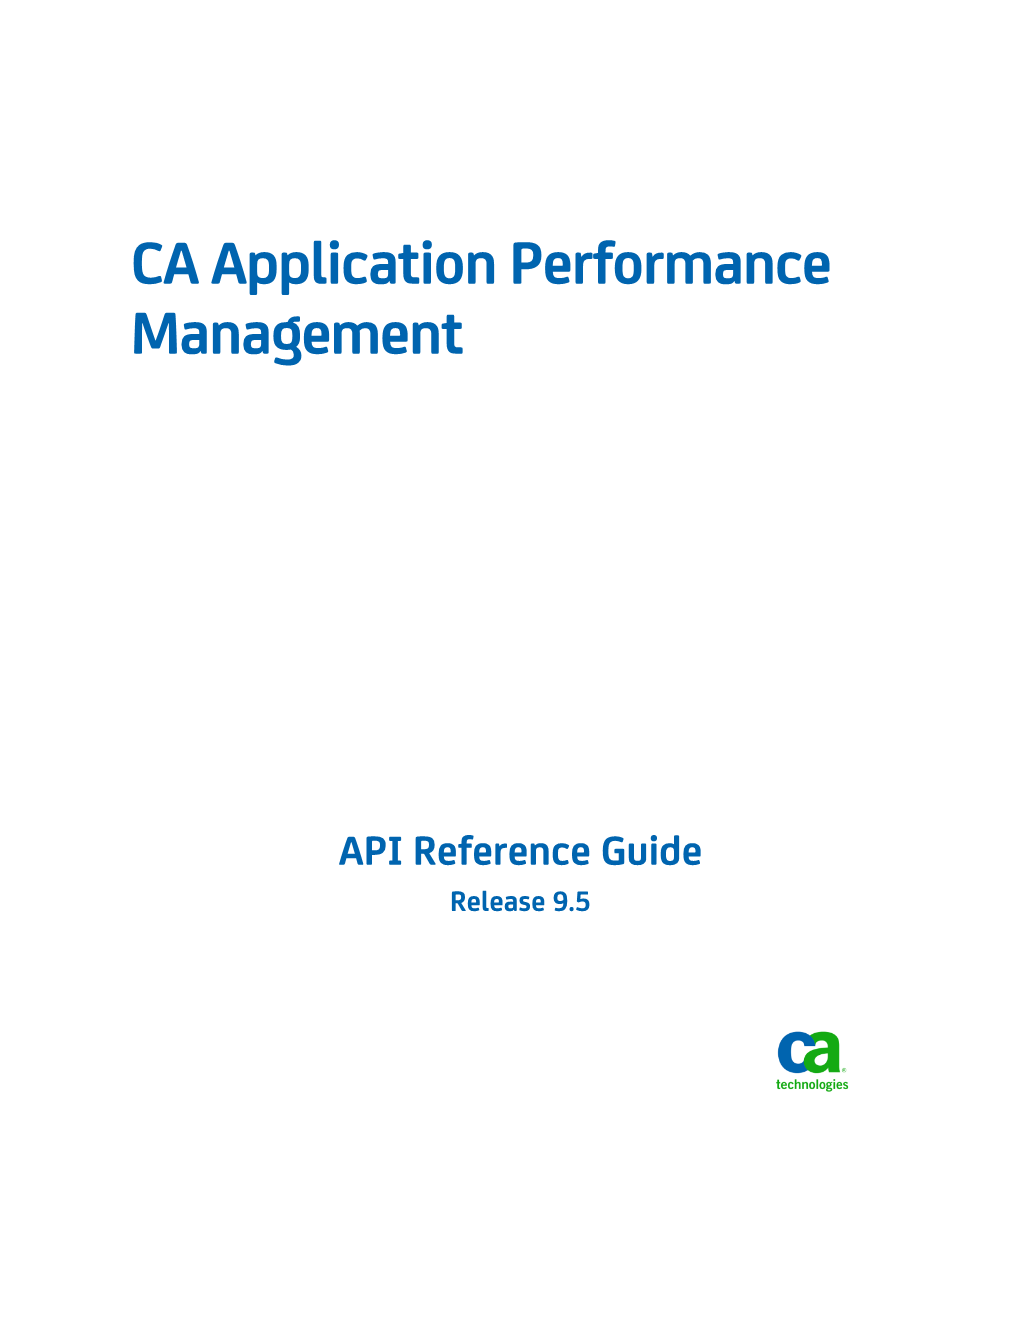 CA Application Performance Management API Reference Guide